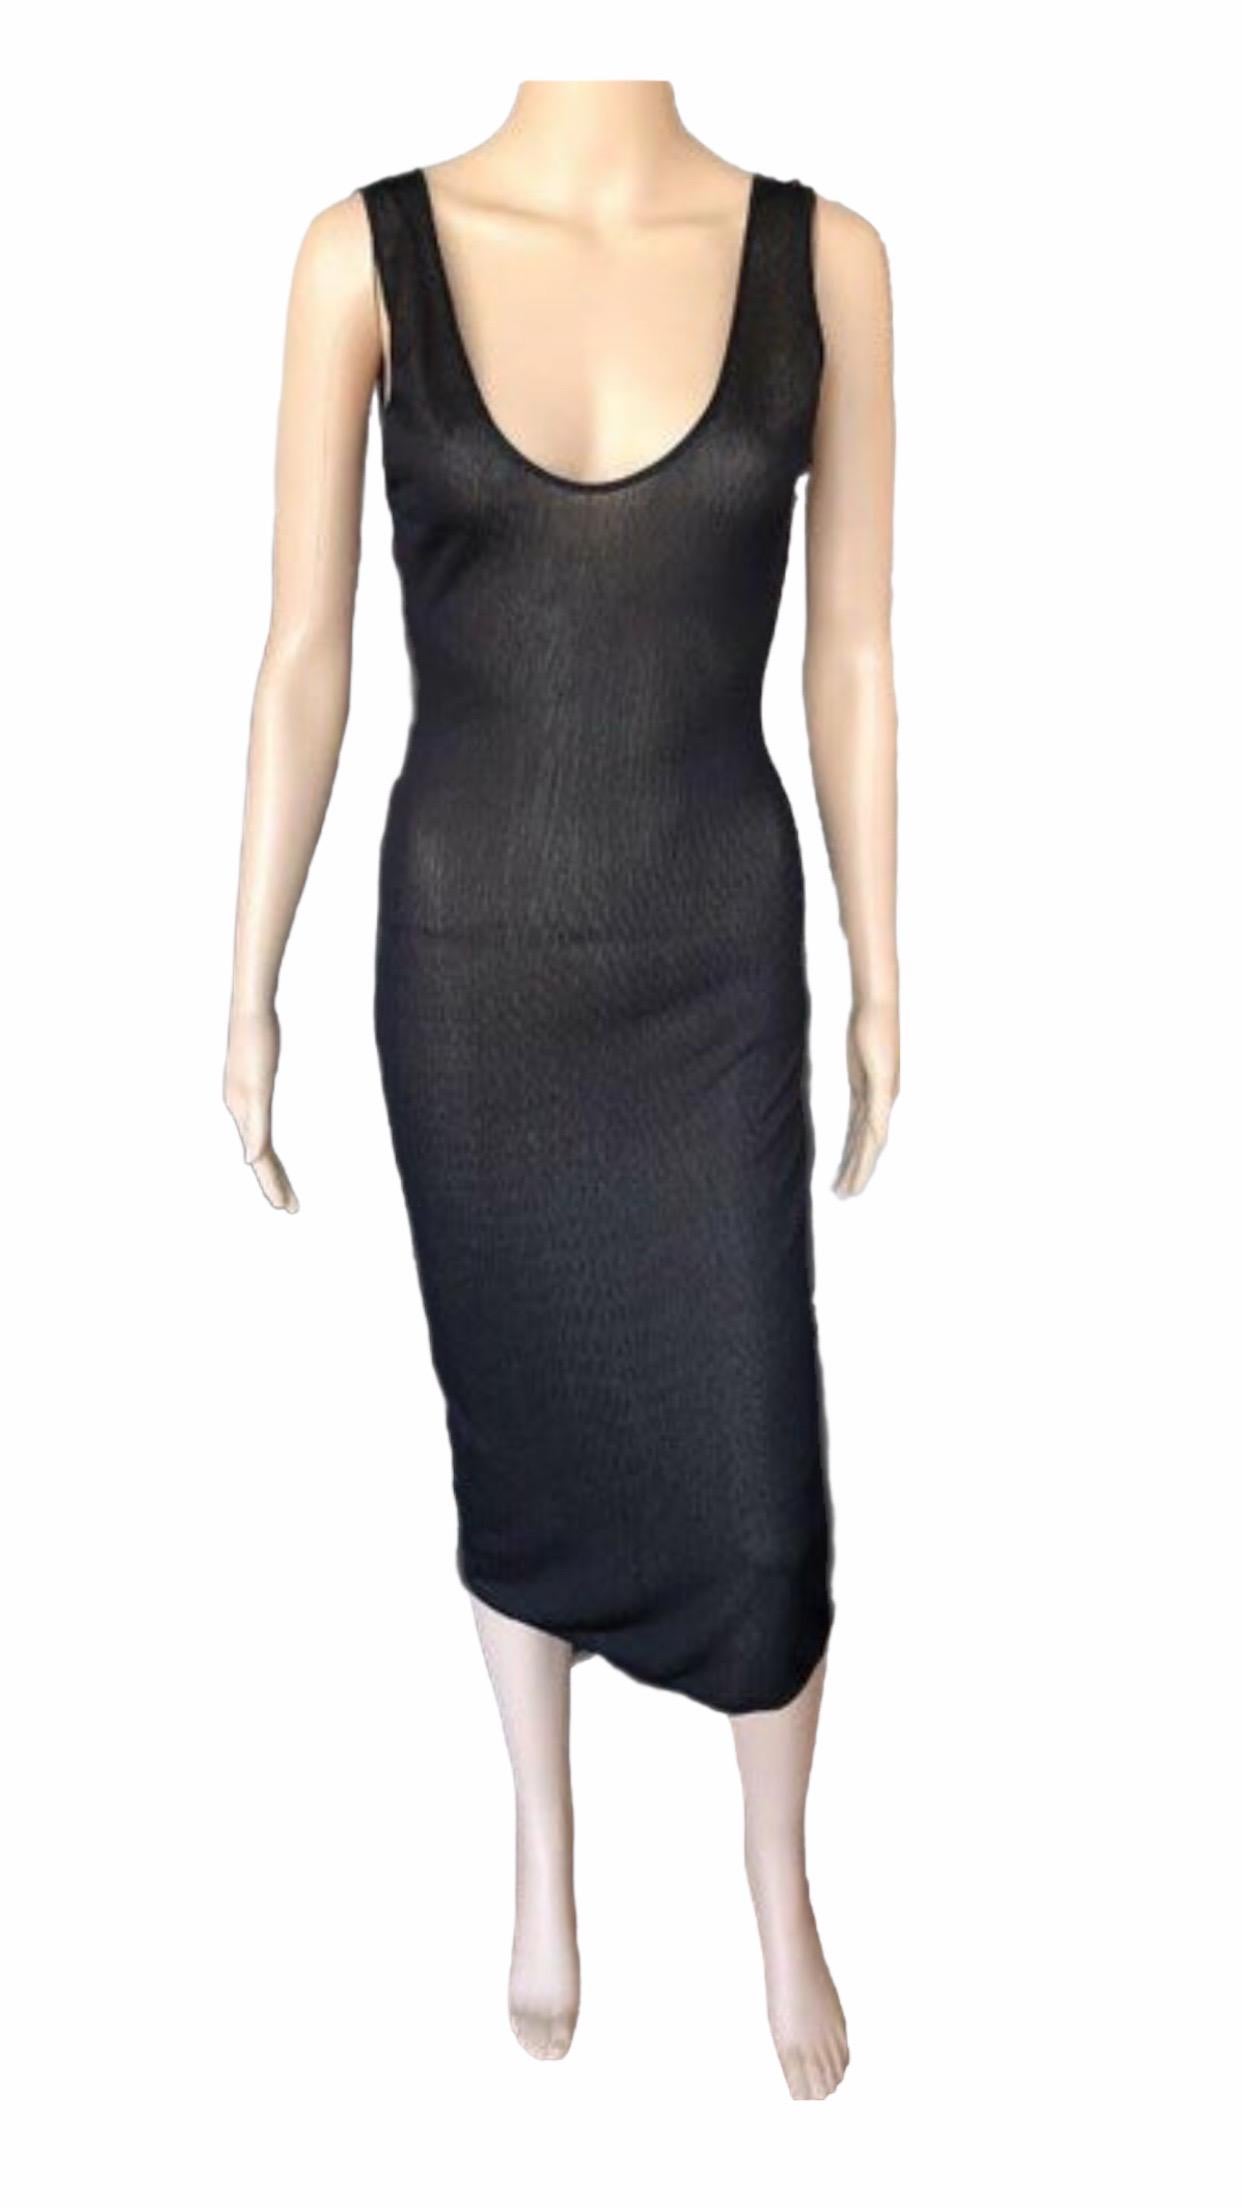 Azzedine Alaia Sheer Bodycon Open Back Dress In Good Condition For Sale In Naples, FL